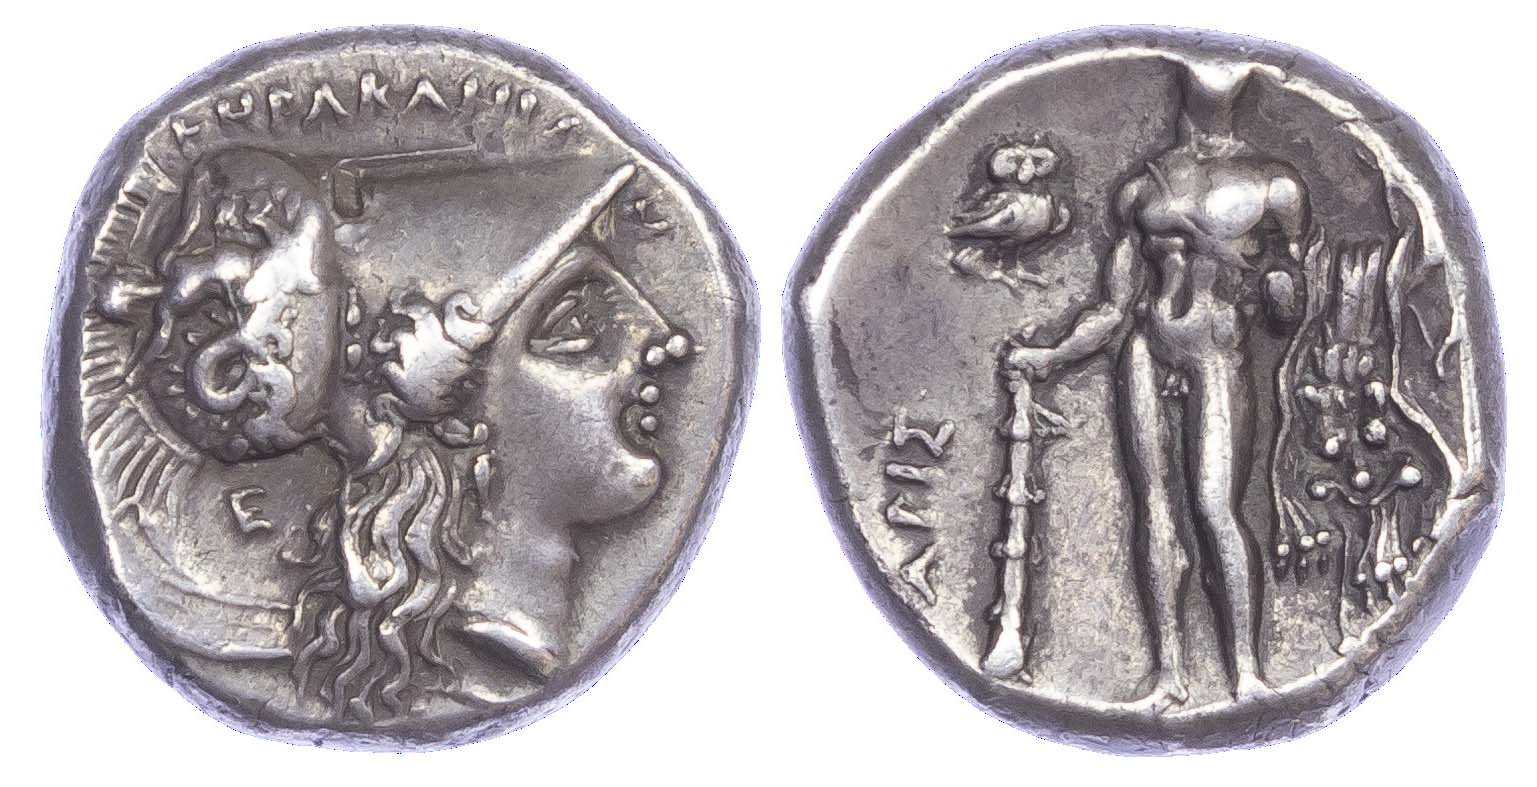 Lucania, Heraclea, Silver Stater